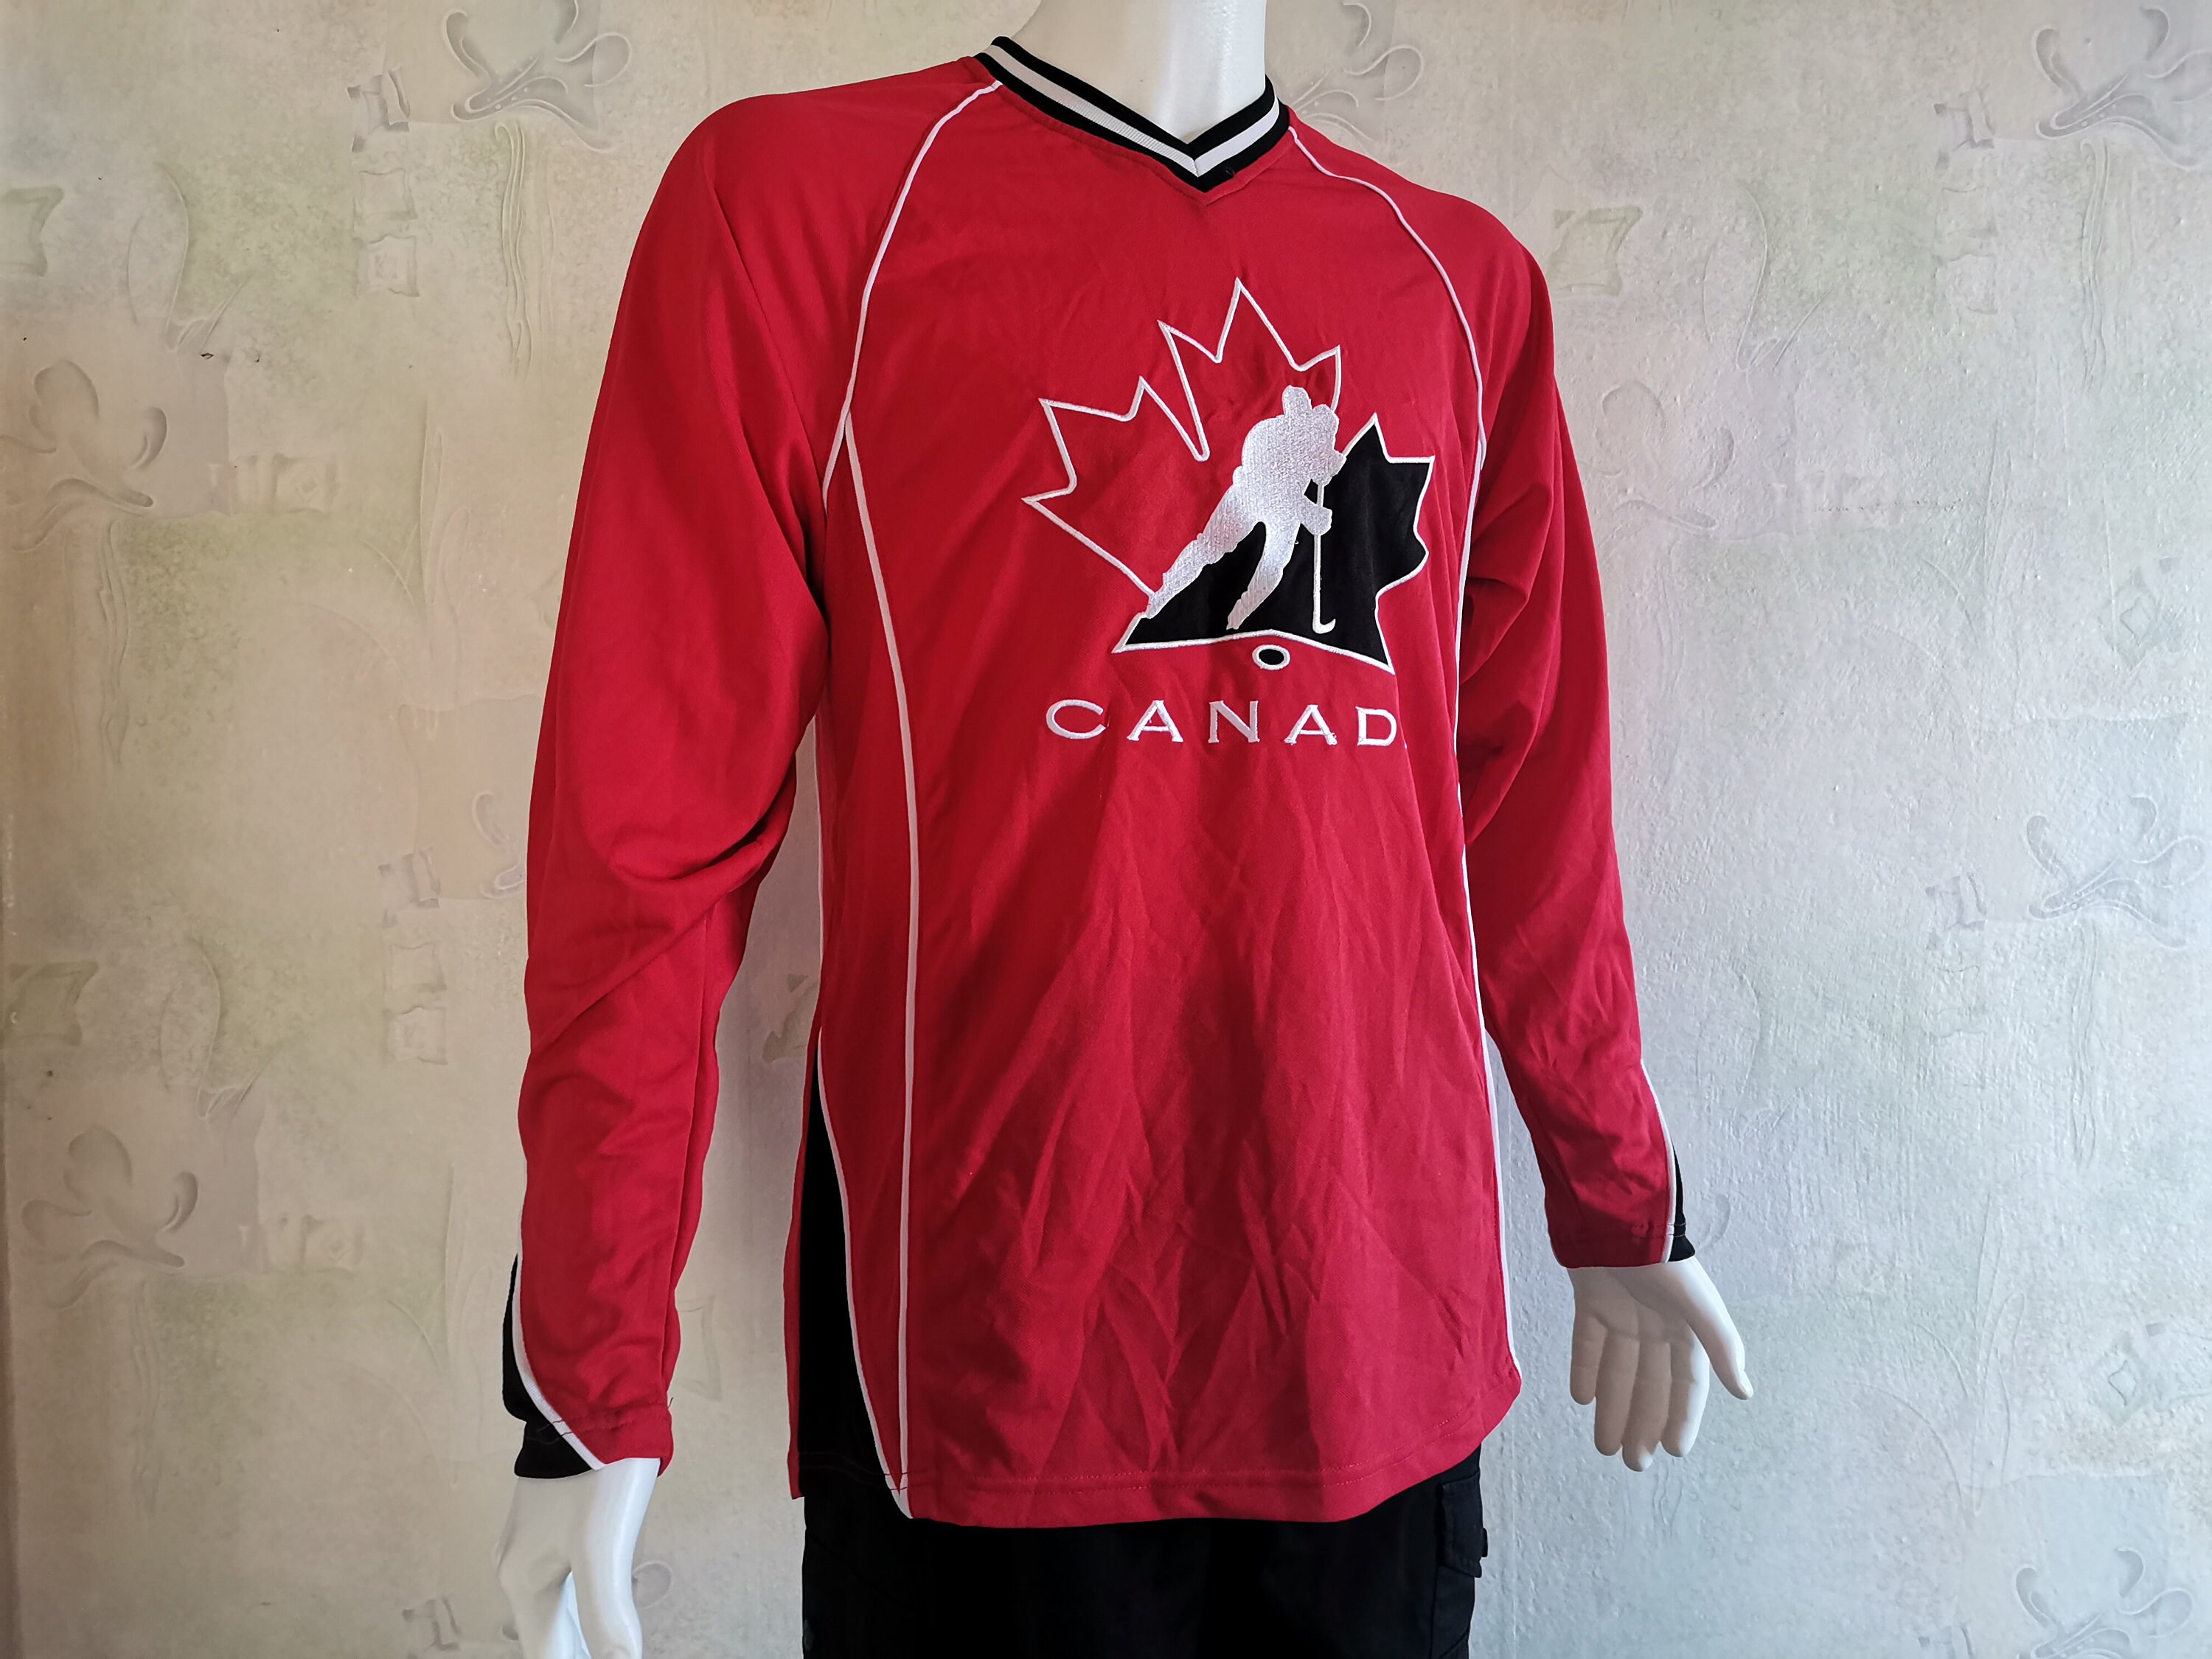 Bauer Team Canada Hockey Practice jersey- Red Men's Size Large Olympics